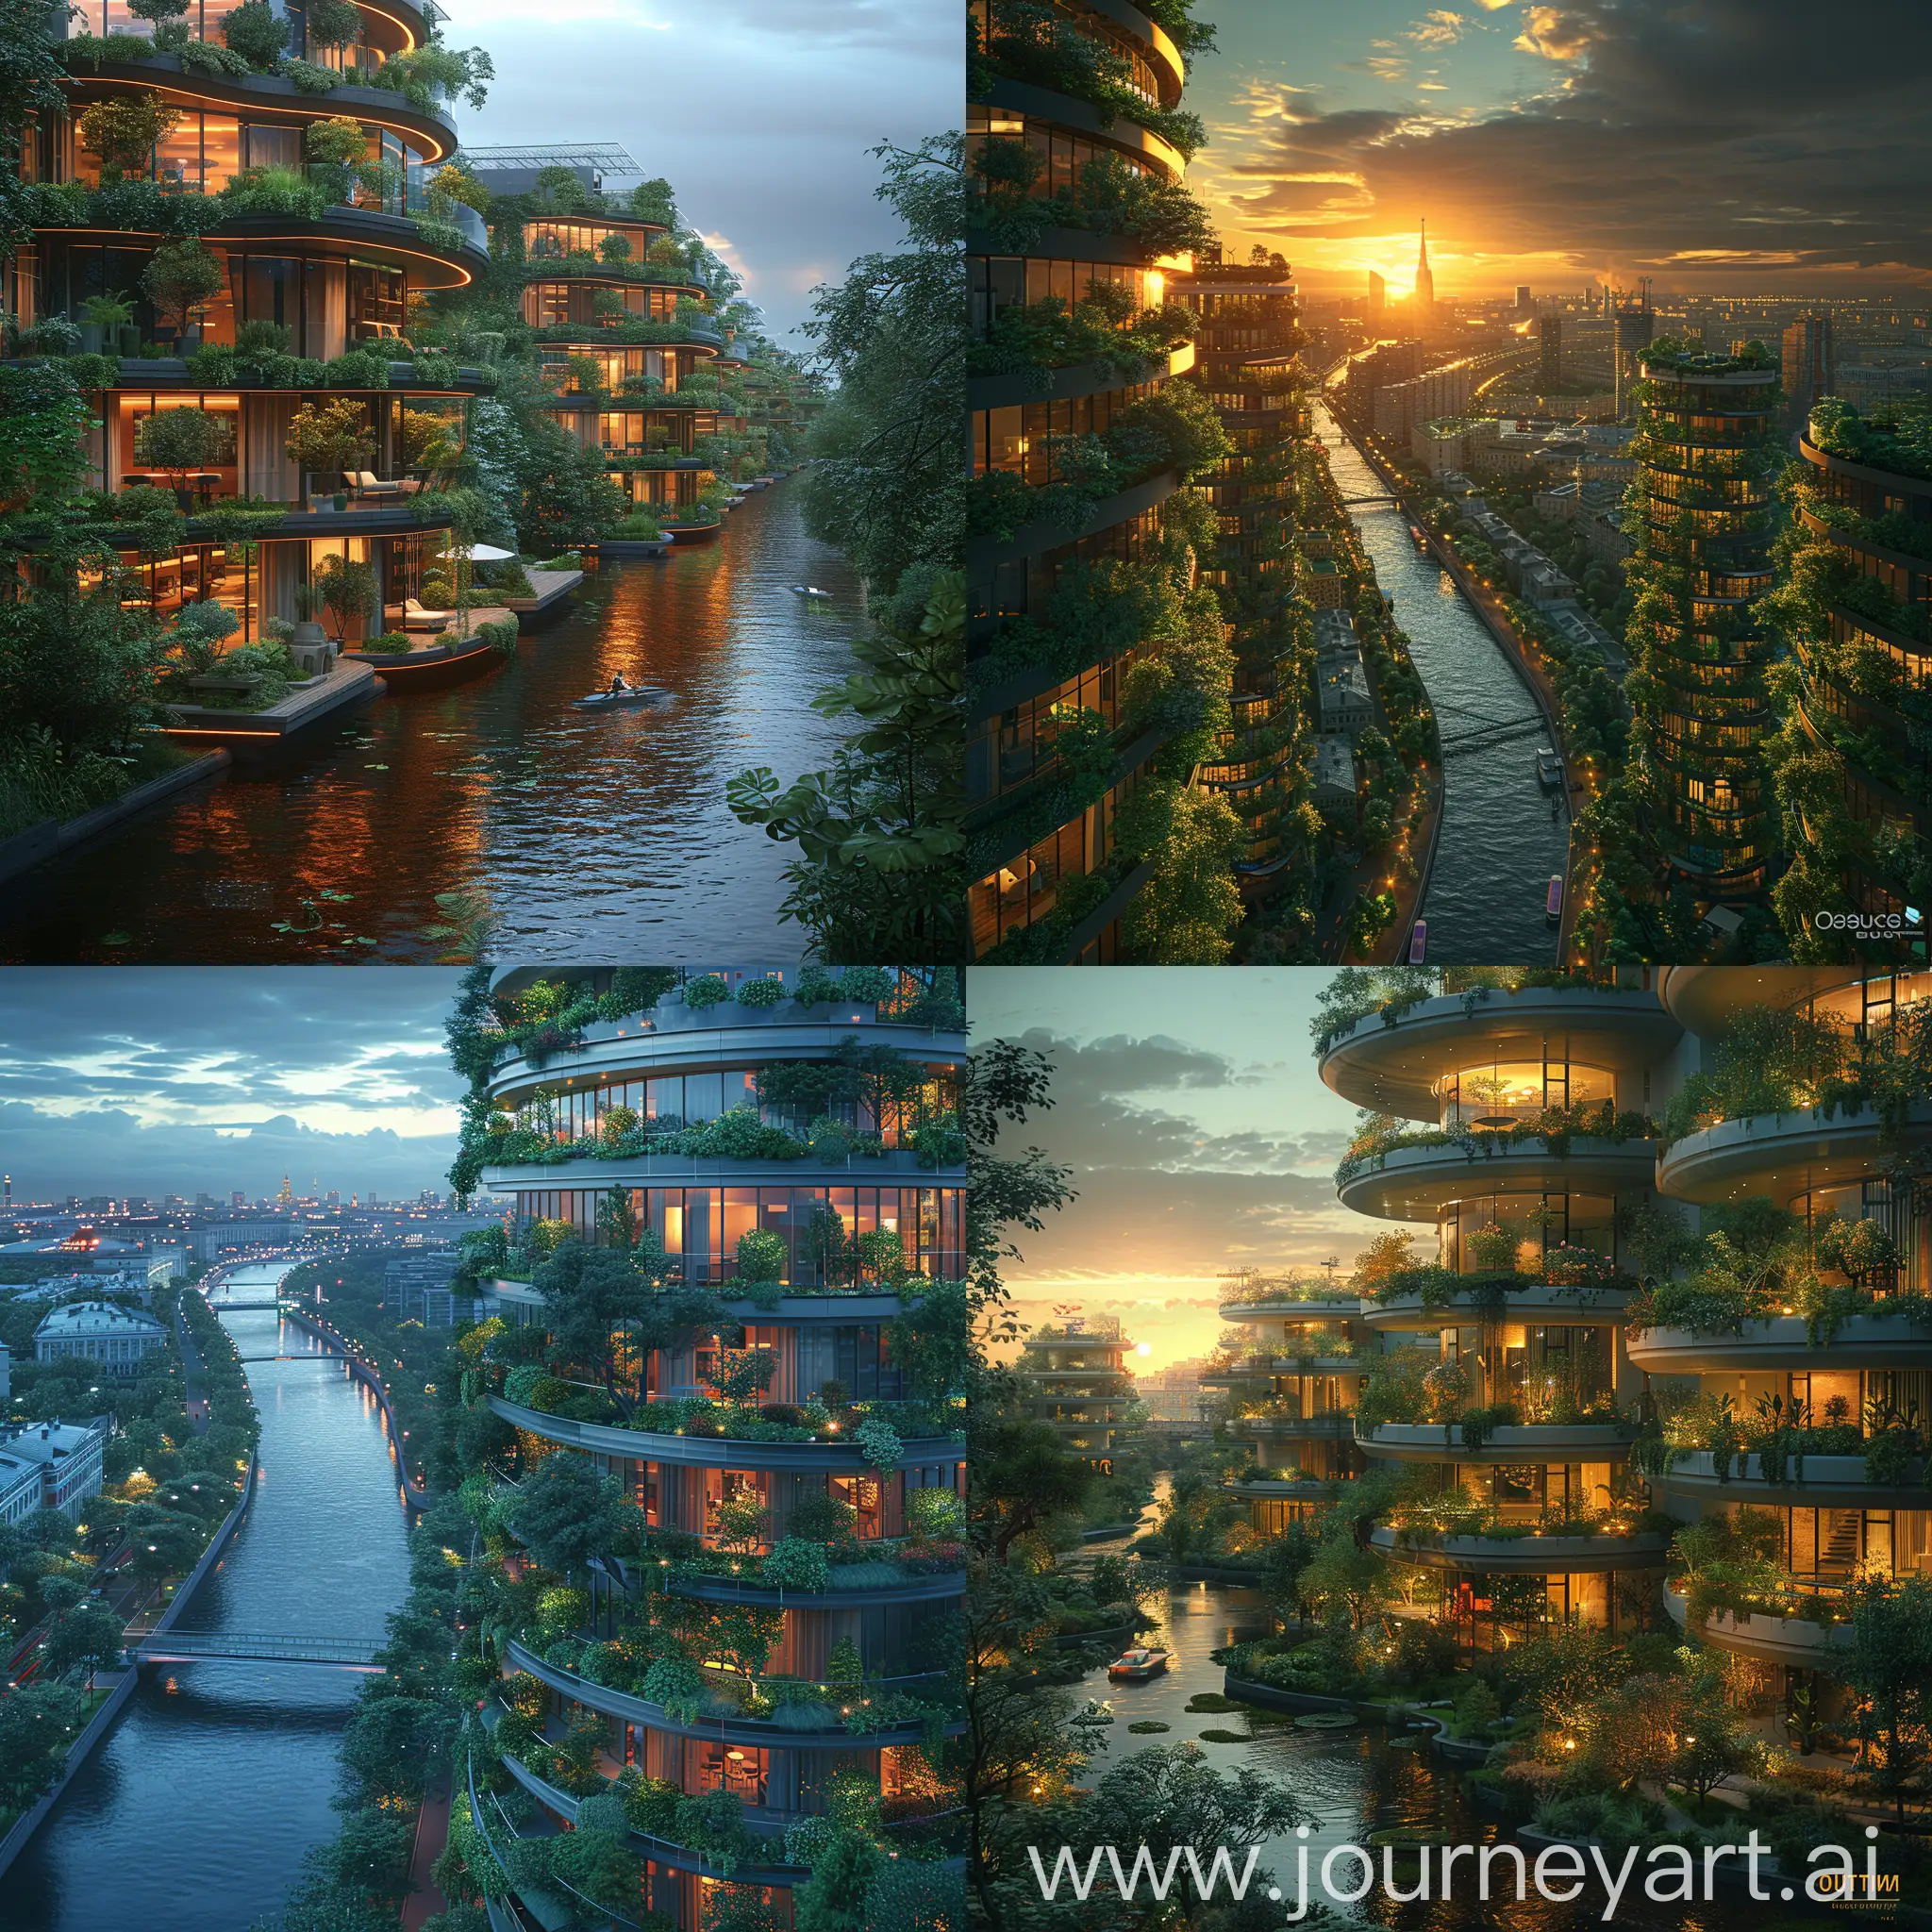 Futuristic-Saint-Petersburg-with-Vertical-Forests-and-Solar-Canals